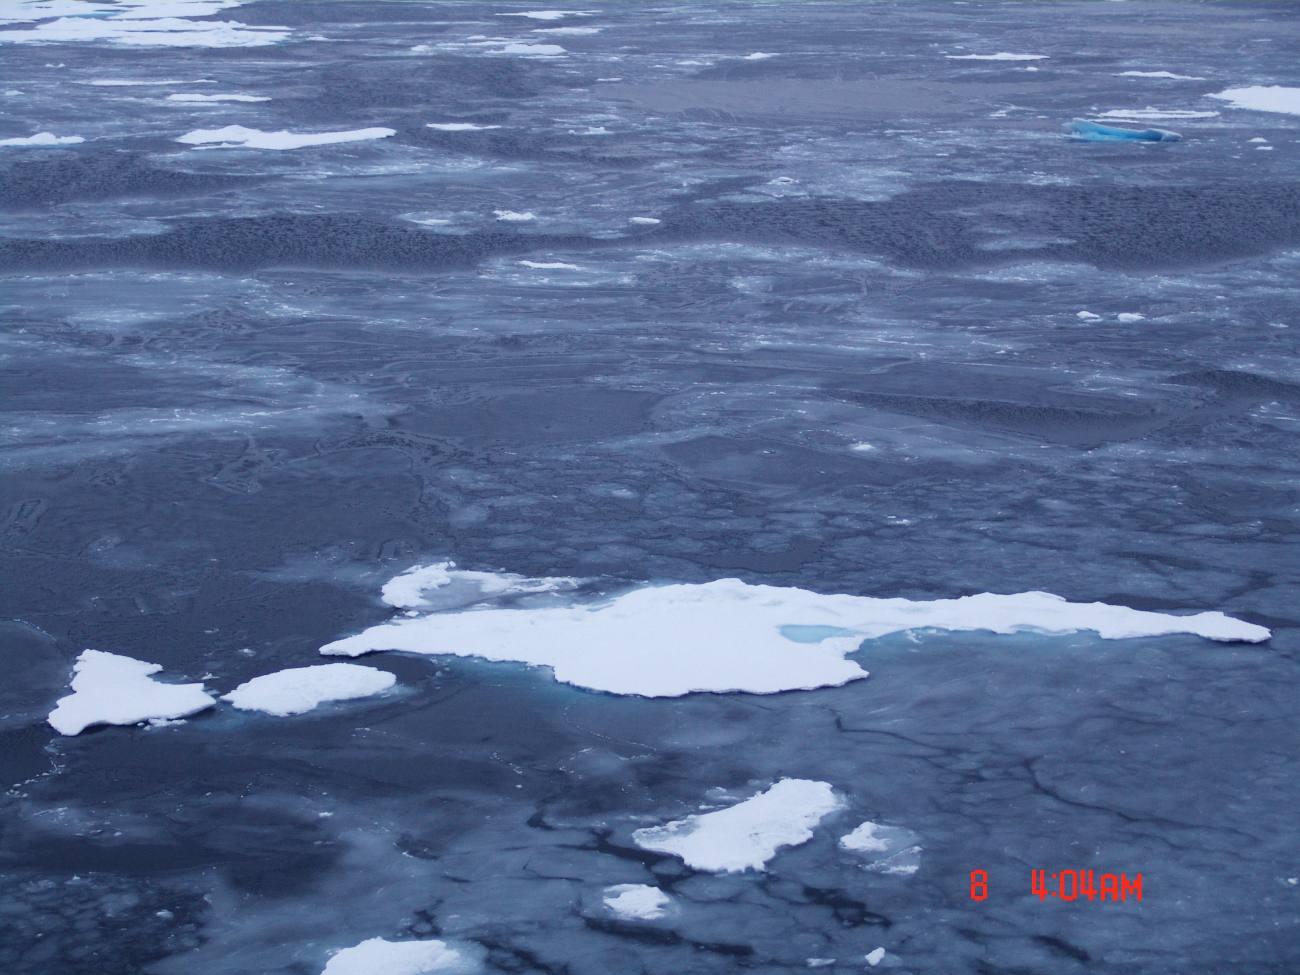 Ice floe becoming locked in place as nilas and gray ice form